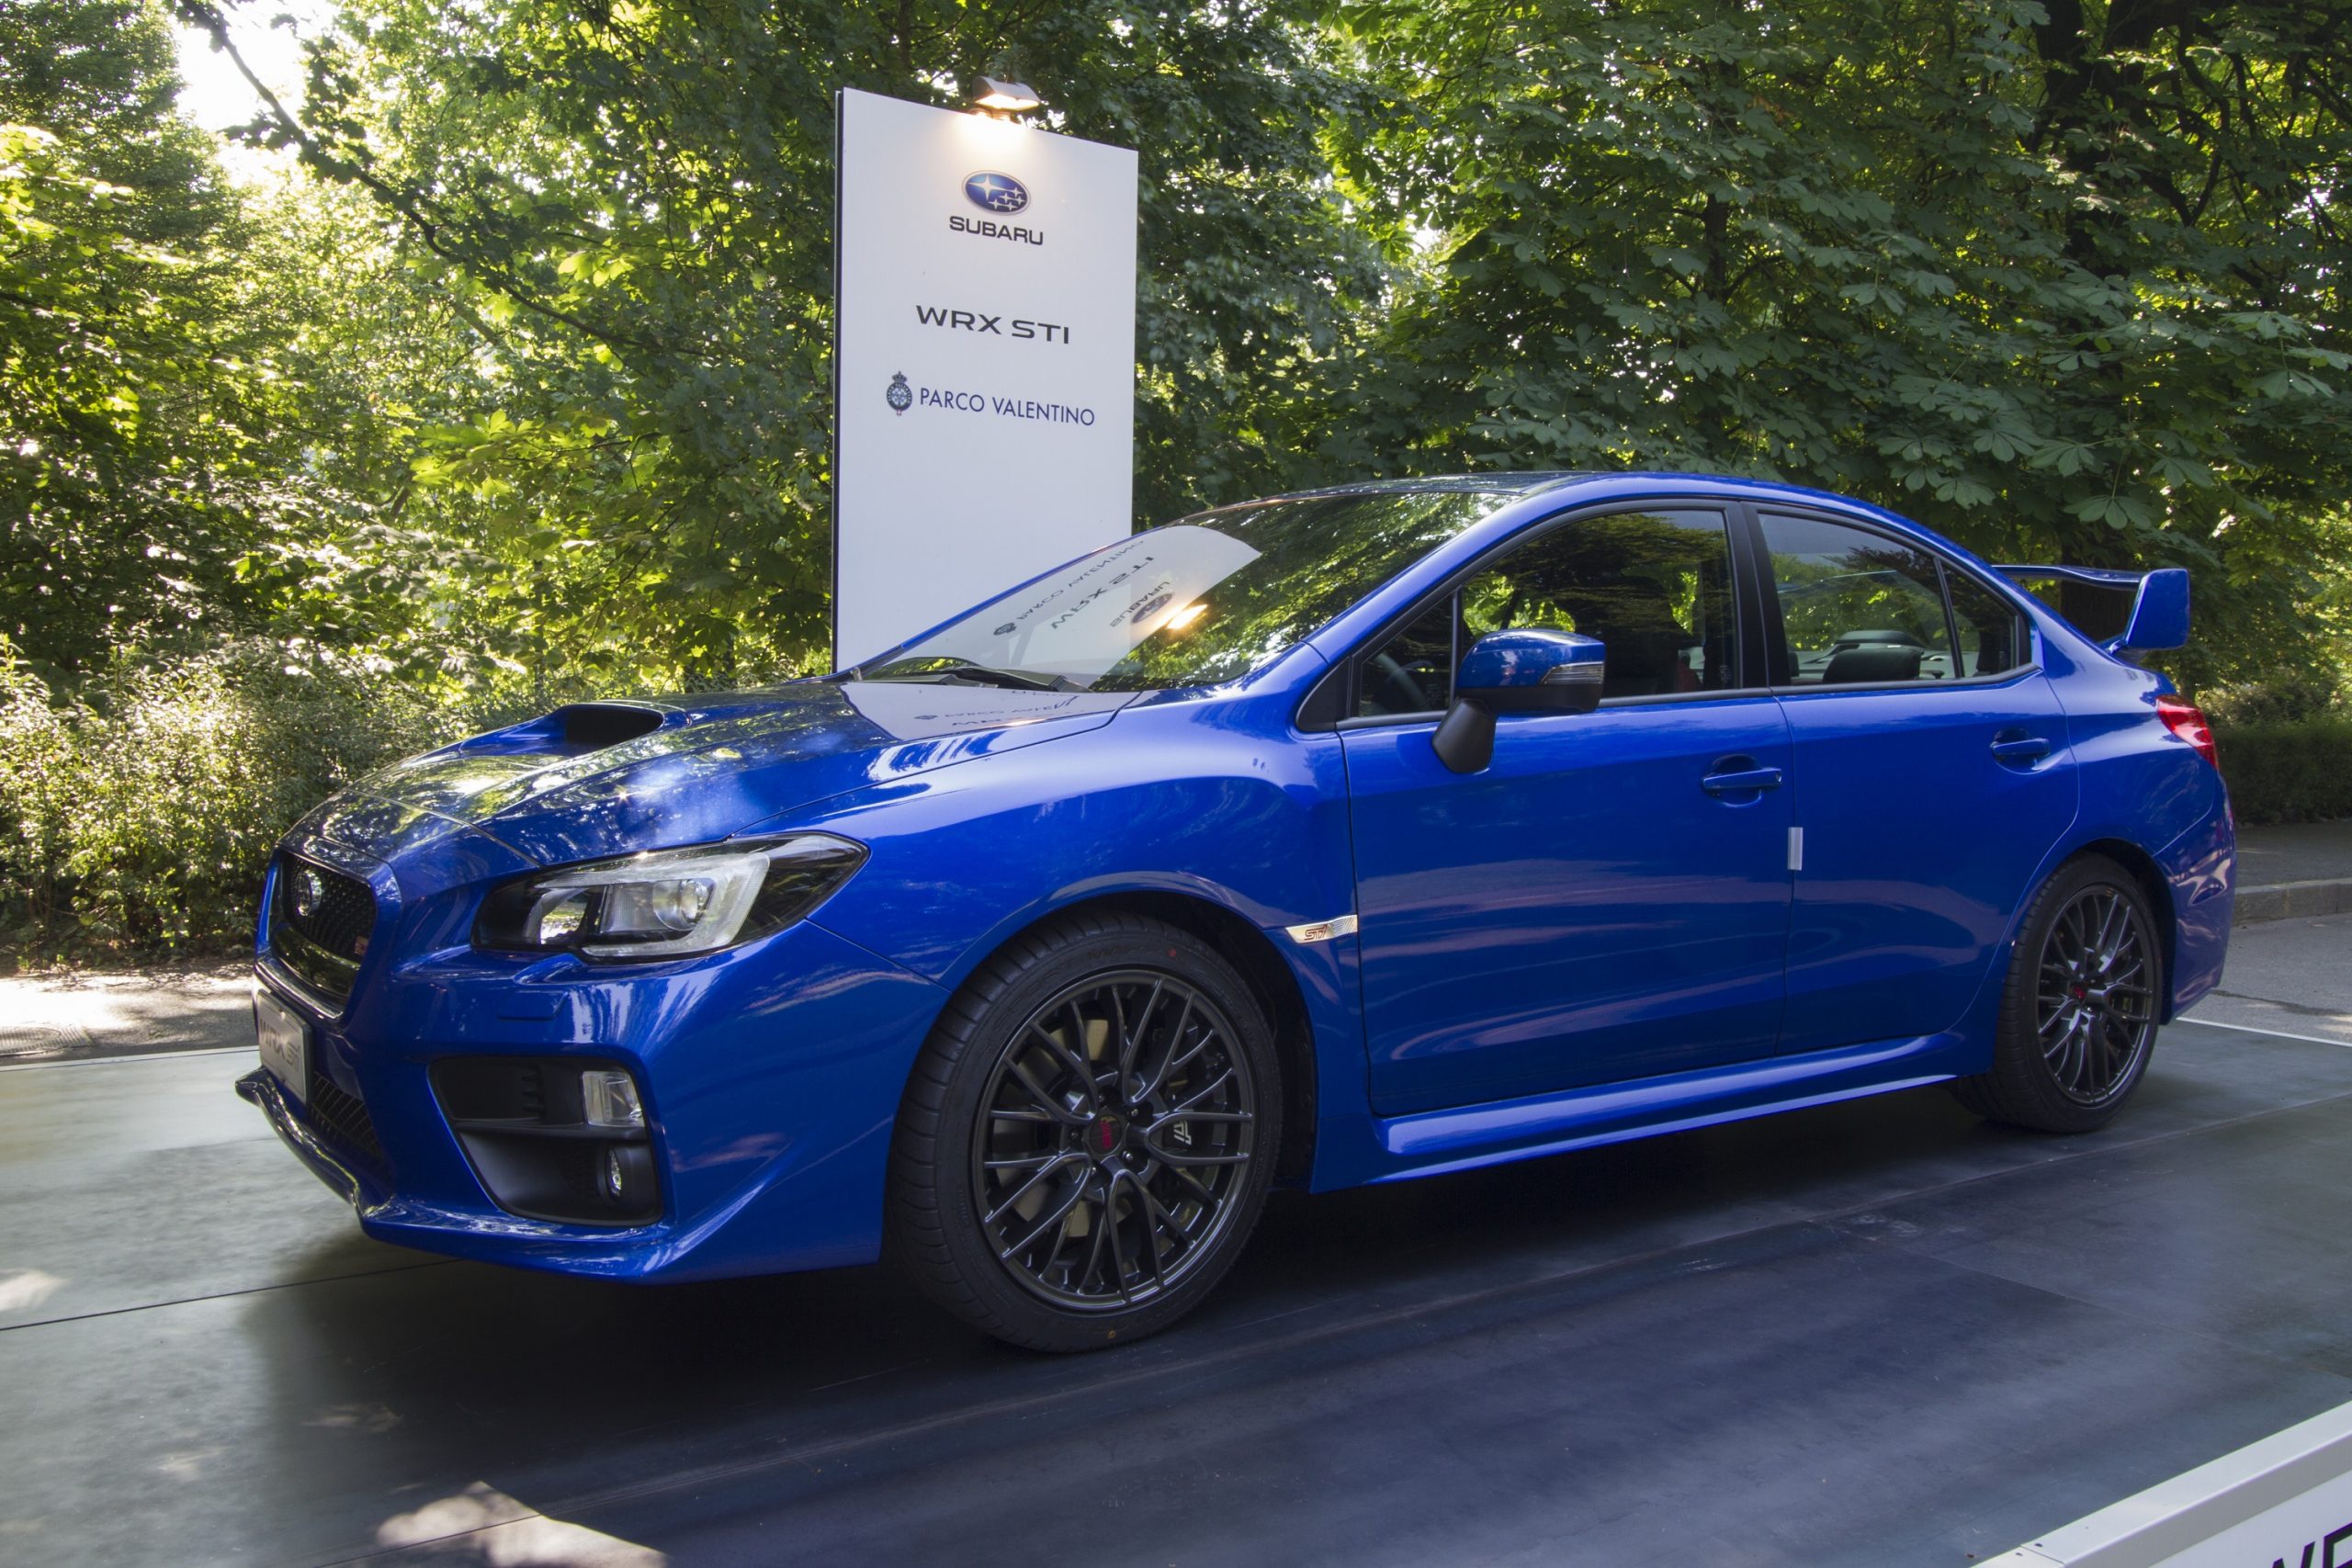 A blue 2021 Subaru WRX STI at an auto show shot under the trees from the front 3/4